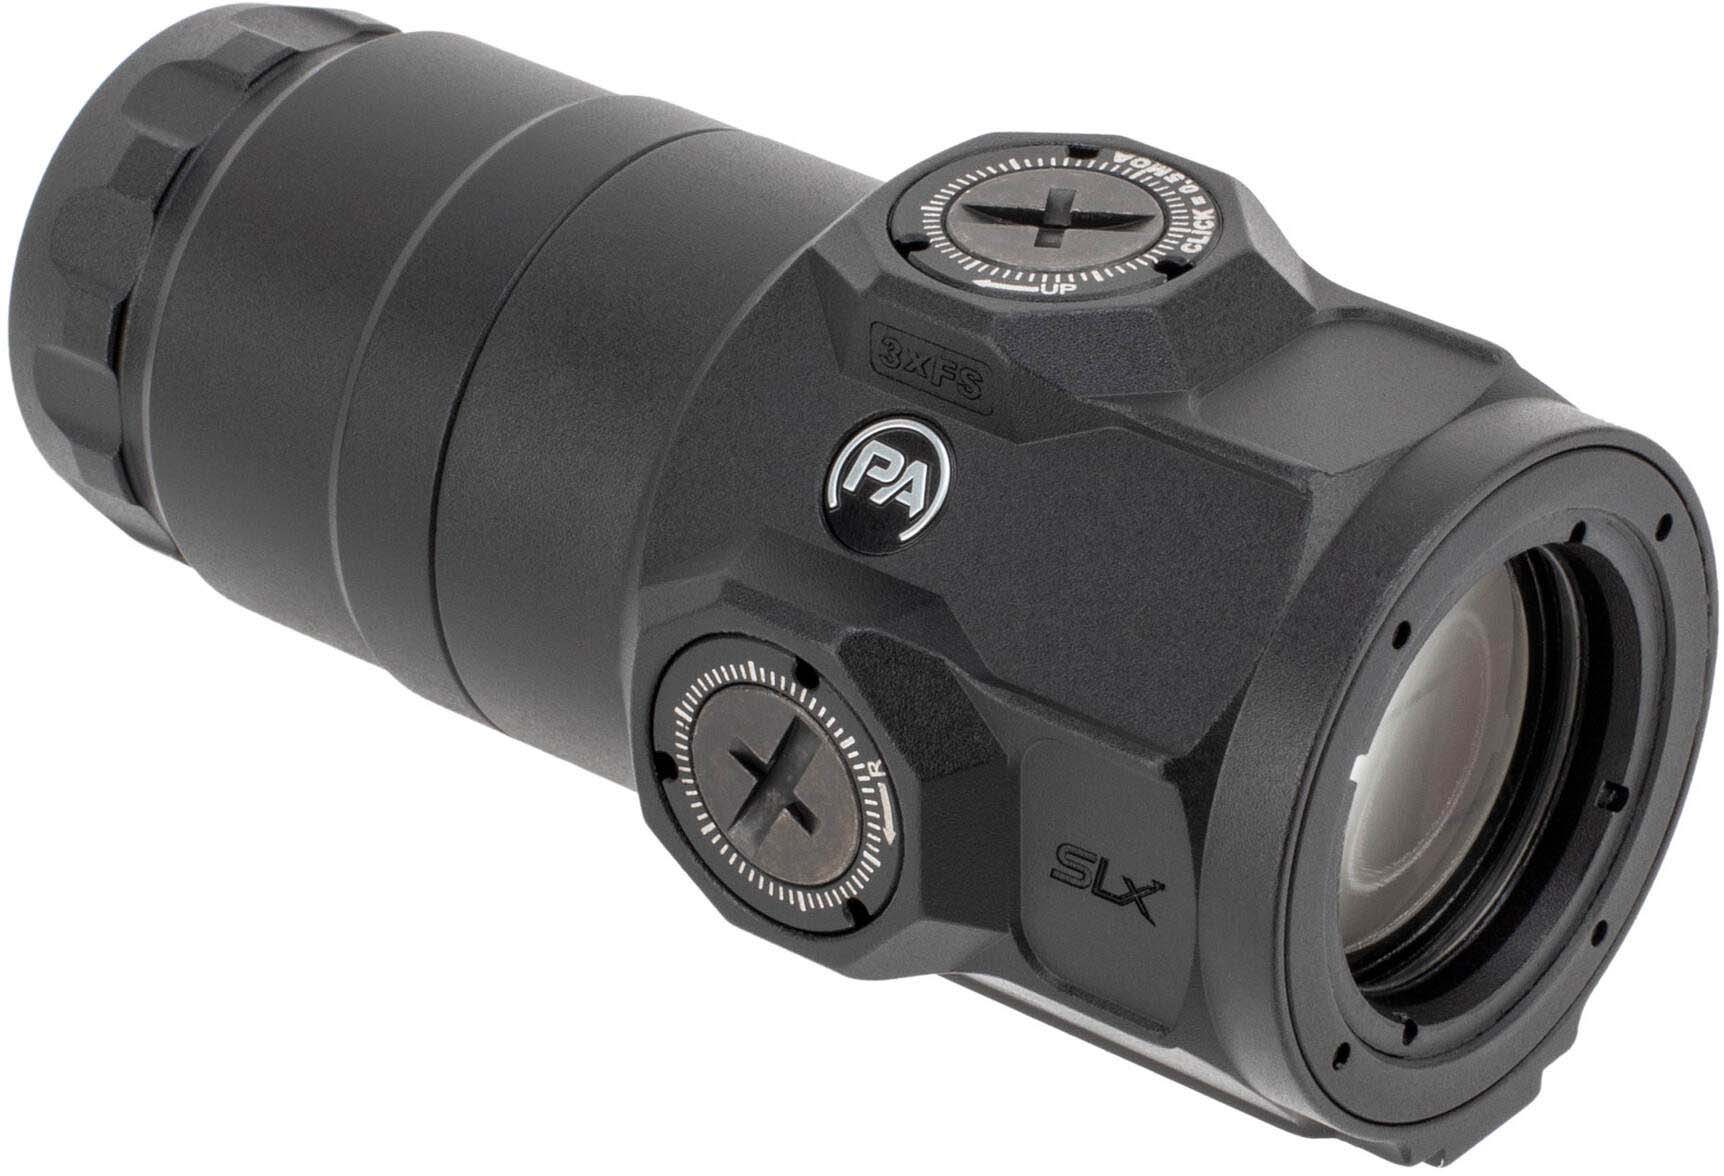 Primary Arms SLx Full Size 3X Red Dot Sight Magnifier | 13% Off 4 